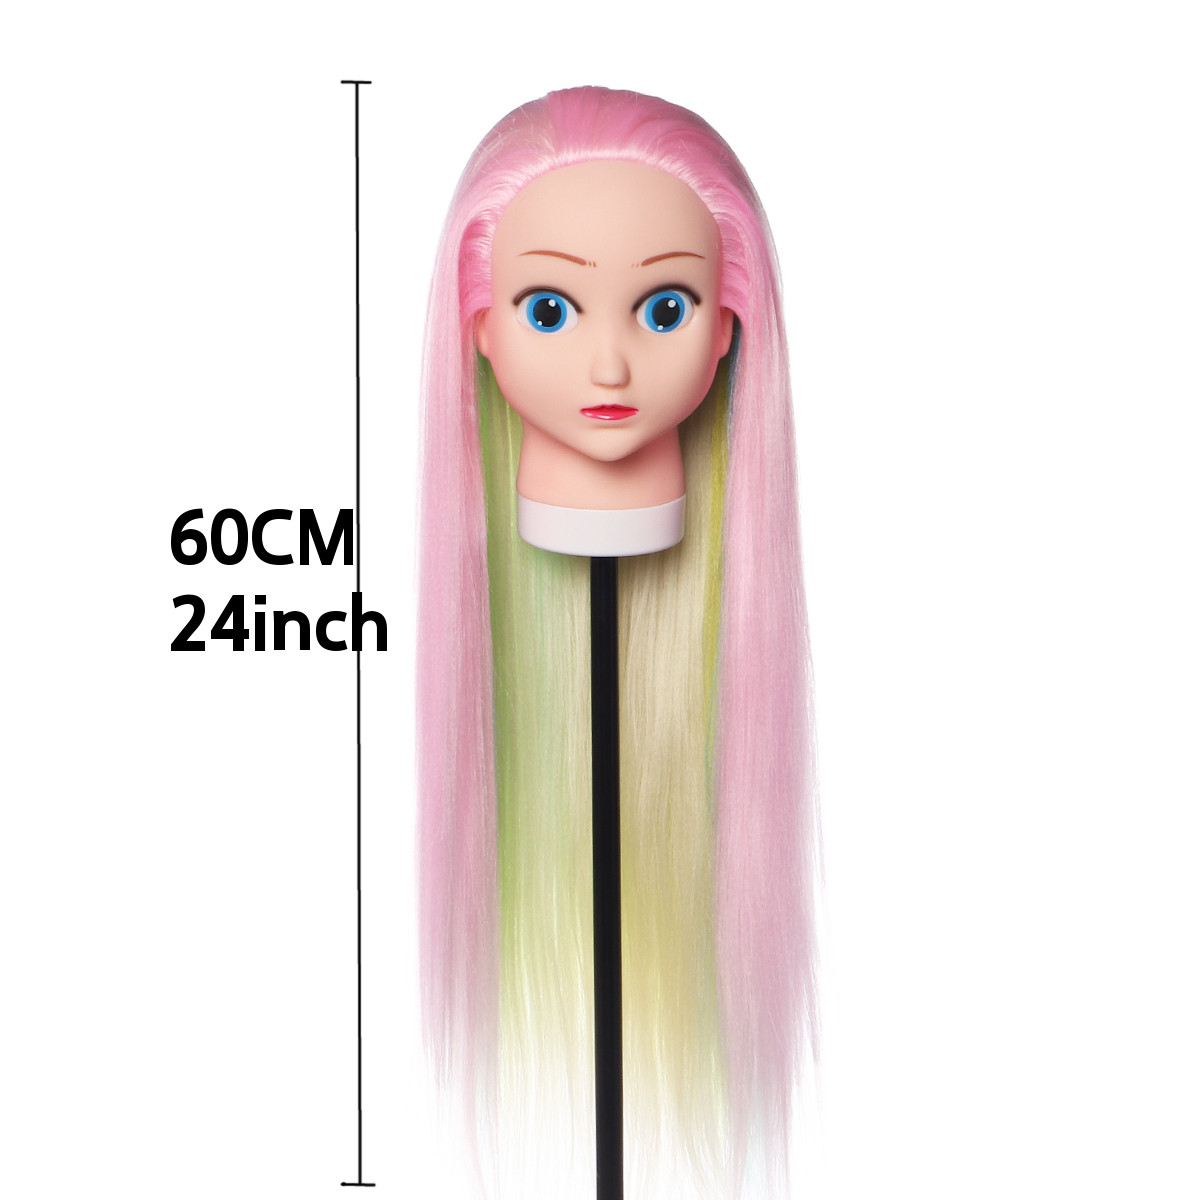 24' Colorful Cartoon professional Hair Mannequin Professional Styling Wig Head Hairdressing Dummy Doll Training Mannequin Head